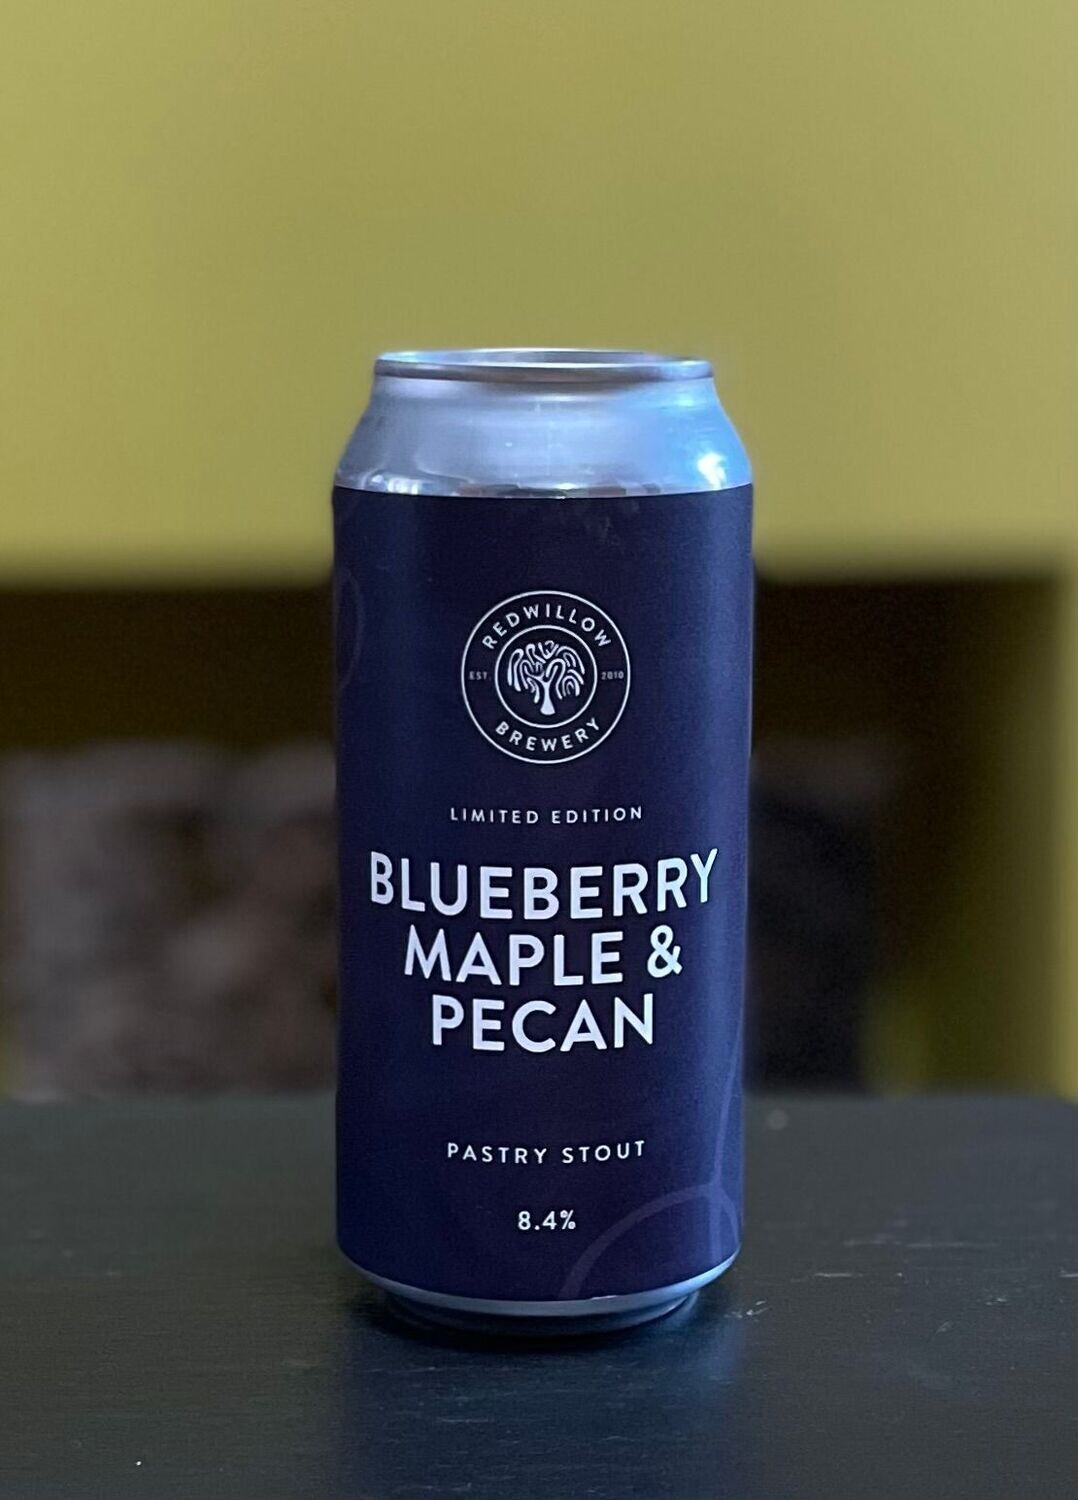 Blueberry Maple & Pecan Pastry Stout